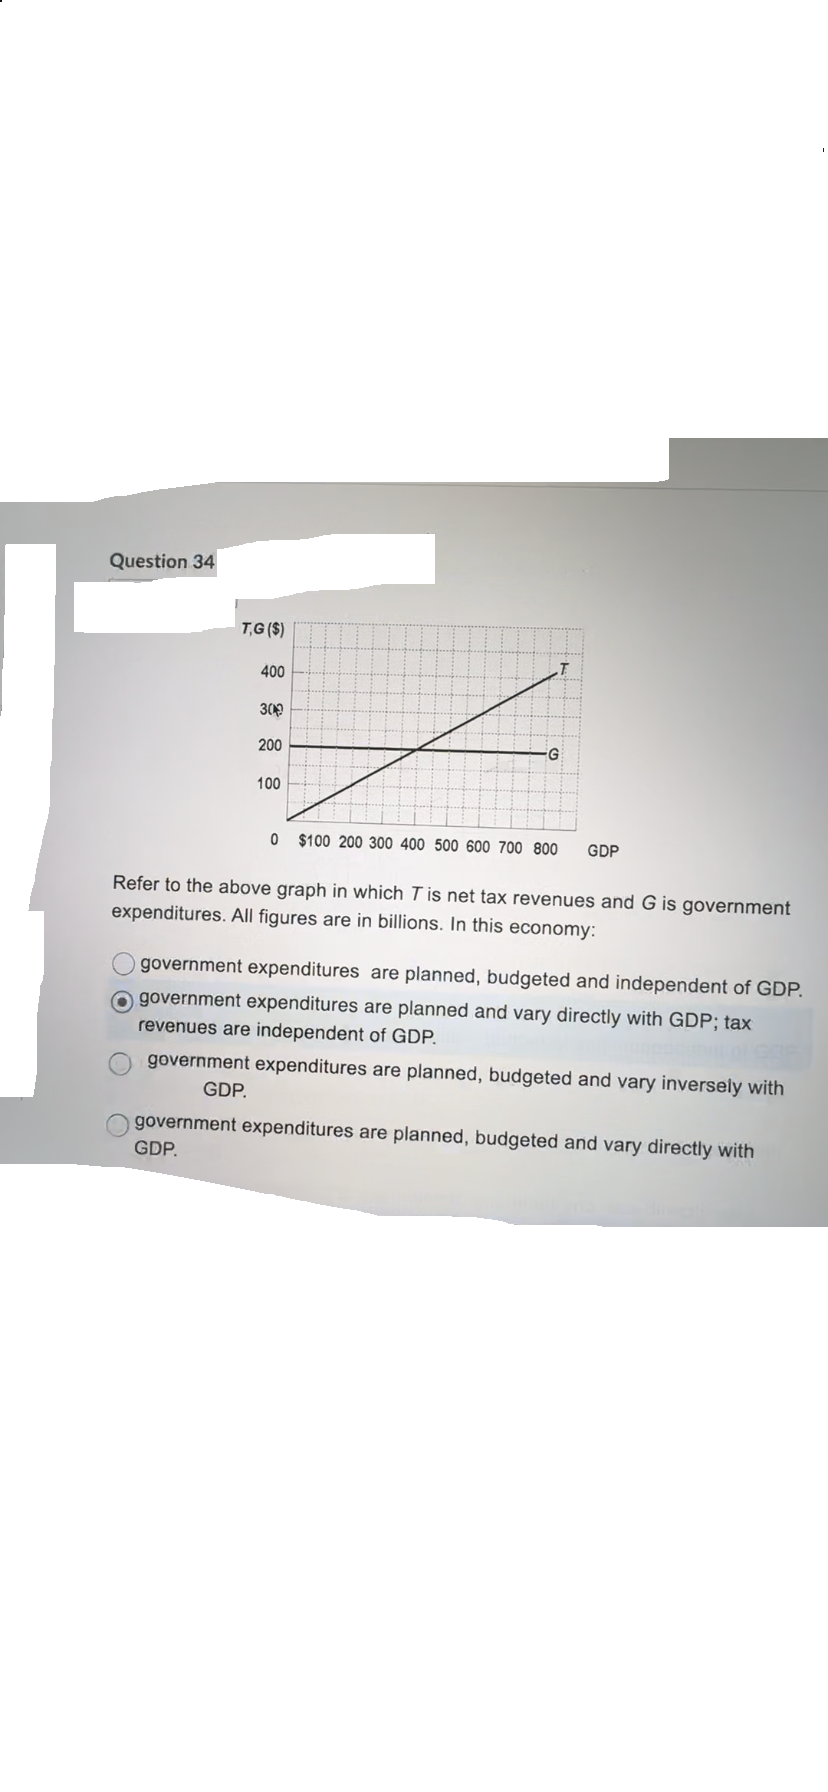 Question 34
T,G ($)
400
309
200
100
G
0 $100 200 300 400 500 600 700 800
GDP
Refer to the above graph in which T is net tax revenues and G is government
expenditures. All figures are in billions. In this economy:
government expenditures are planned, budgeted and independent of GDP.
government expenditures are planned and vary directly with GDP; tax
revenues are independent of GDP.
government expenditures are planned, budgeted and vary inversely with
GDP.
government expenditures are planned, budgeted and vary directly with
GDP.